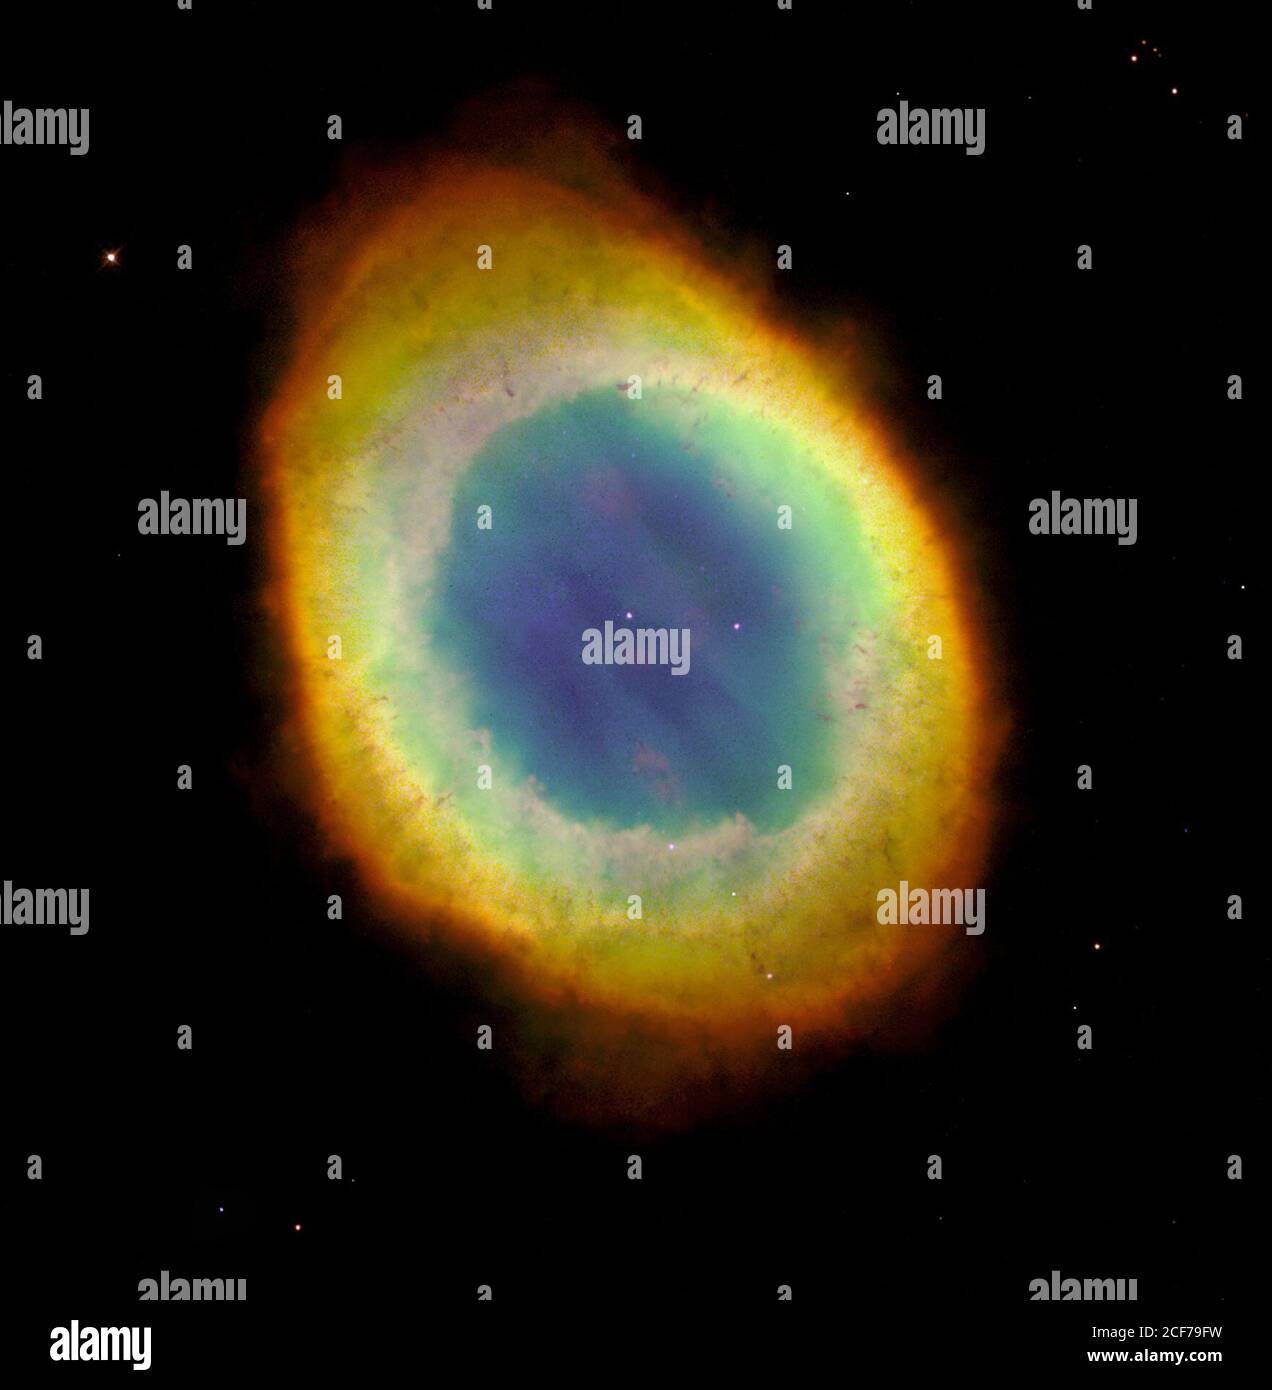 The NASA Hubble Space Telescope has captured the sharpest view yet of the most famous of all planetary nebulae, the Ring Nebula (M57). In this October 1998 image, the telescope has looked down a barrel of gas cast off by a dying star thousands of years ago. This photo reveals elongated dark clumps of material embedded in the gas at the edge of the nebula; the dying central star floating in a blue haze of hot gas. The nebula is about a light-year in diameter and is located some 2,000 light-years from Earth in the direction of the constellation Lyra. The colors are approximately true colors. The Stock Photo